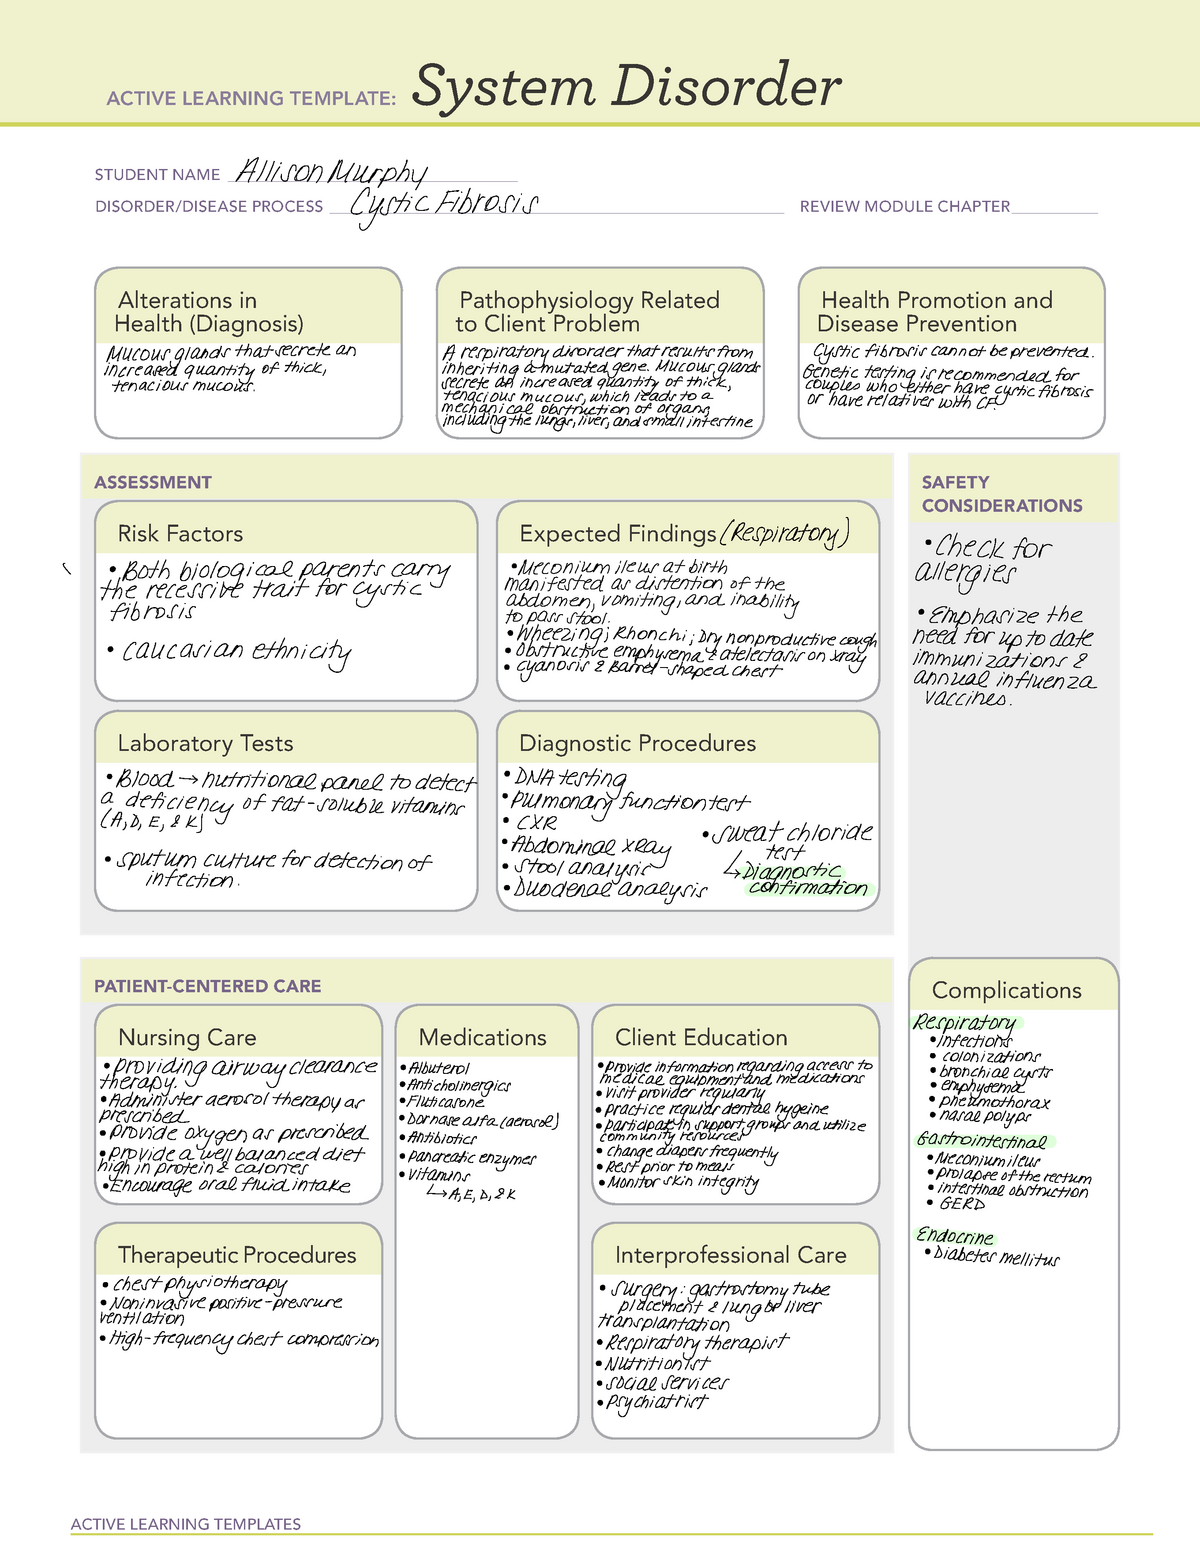 Systems Disorder Active Learning Template Cystic Fibrosis